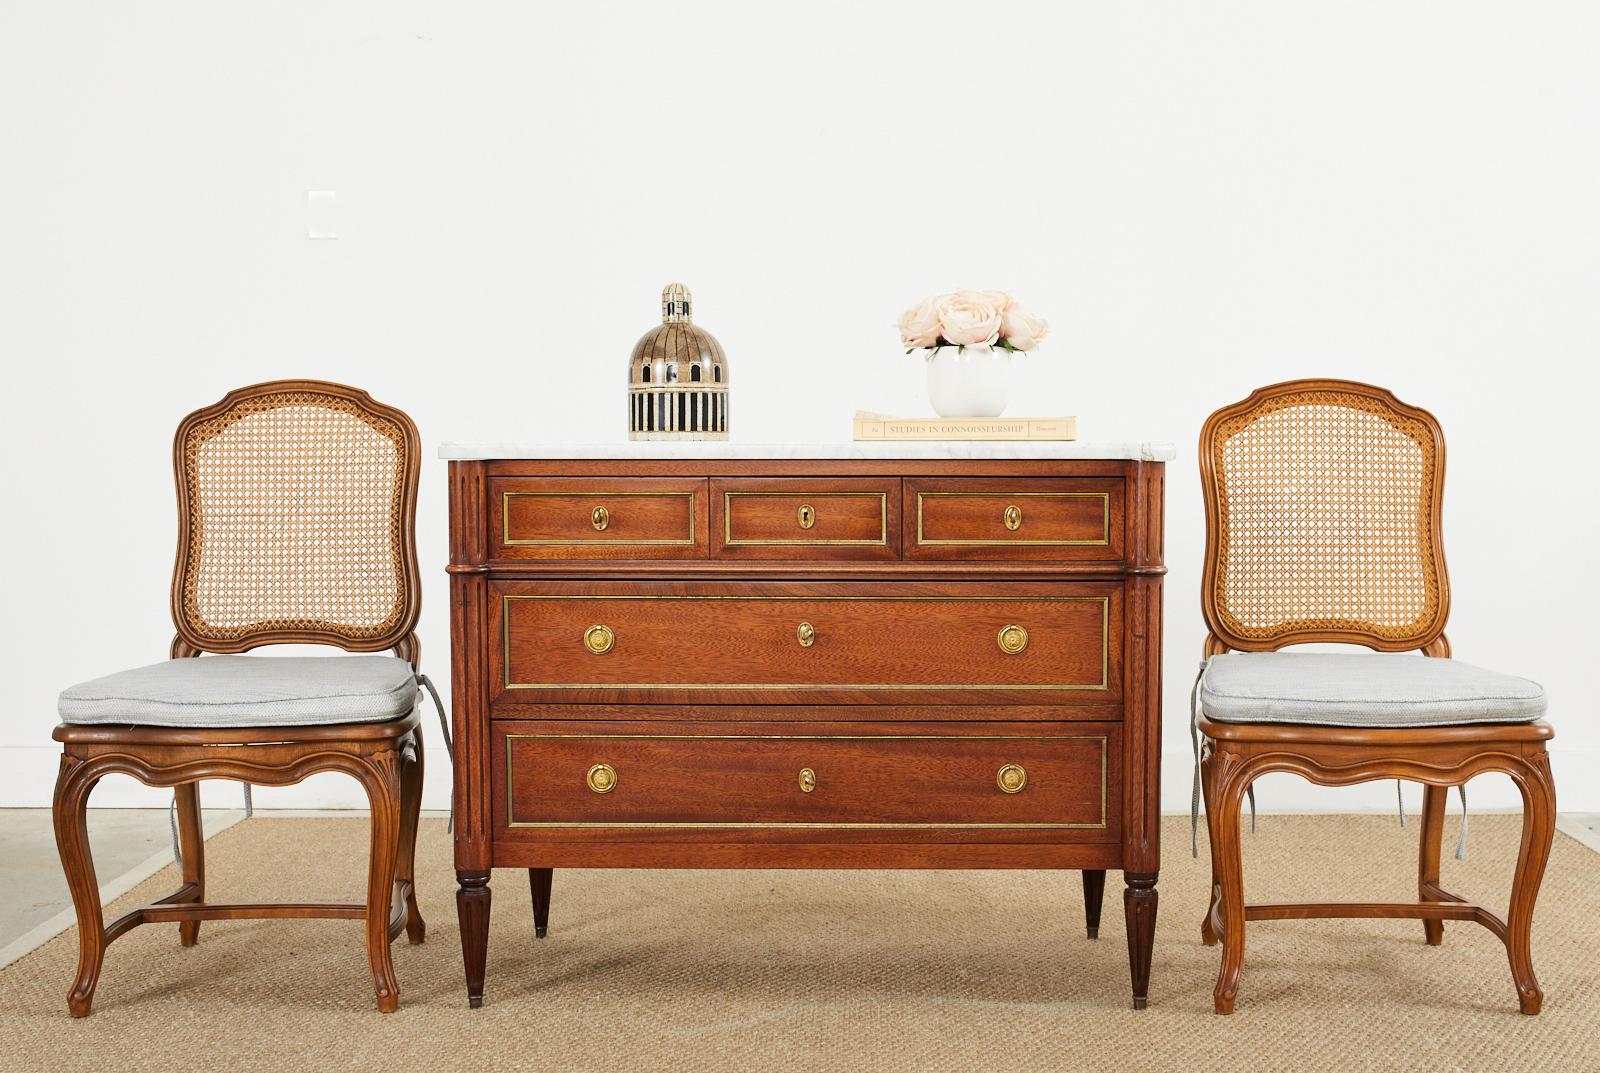 Dashing French mahogany marble top dresser, chest of drawers, or commode crafted in the grand Louis XVI taste. The three drawer chest has a mahogany case with reeded pilaster columns on the front corners and is topped with a conforming slab of